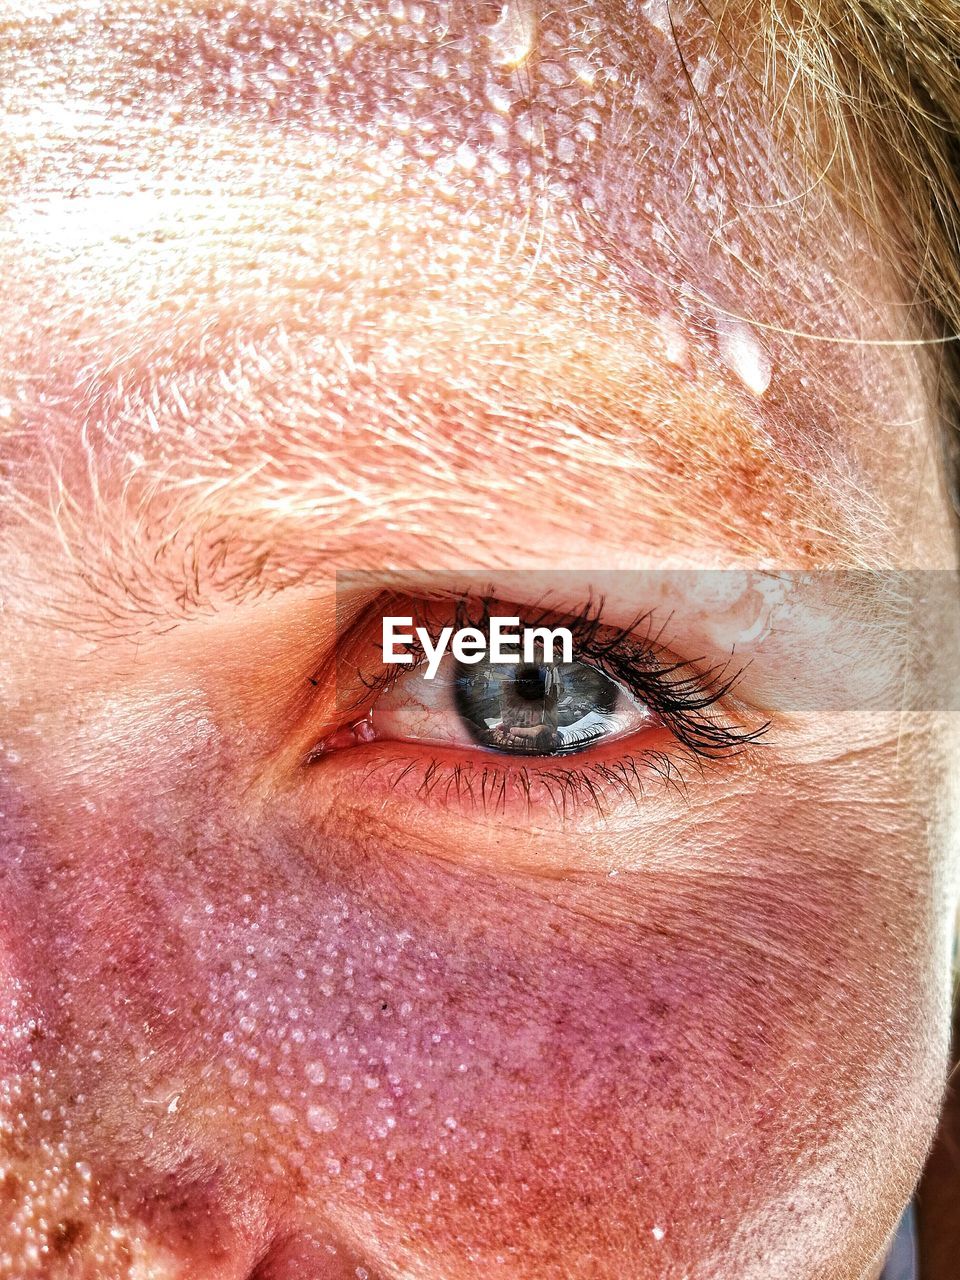 Cropped image of woman with sunburned face